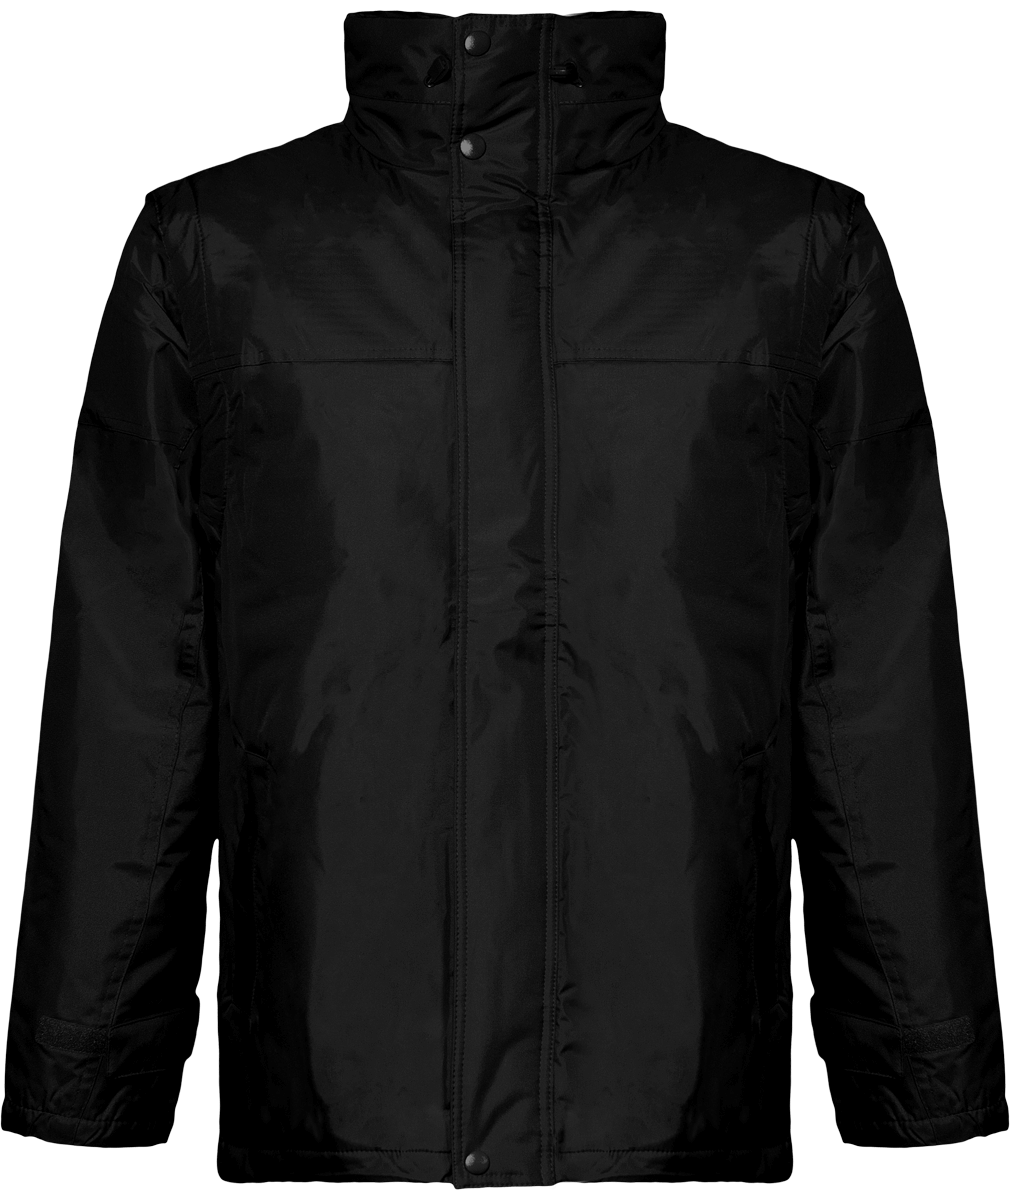 Customizable Premium Quality Jacket With Removable Sleeves Black